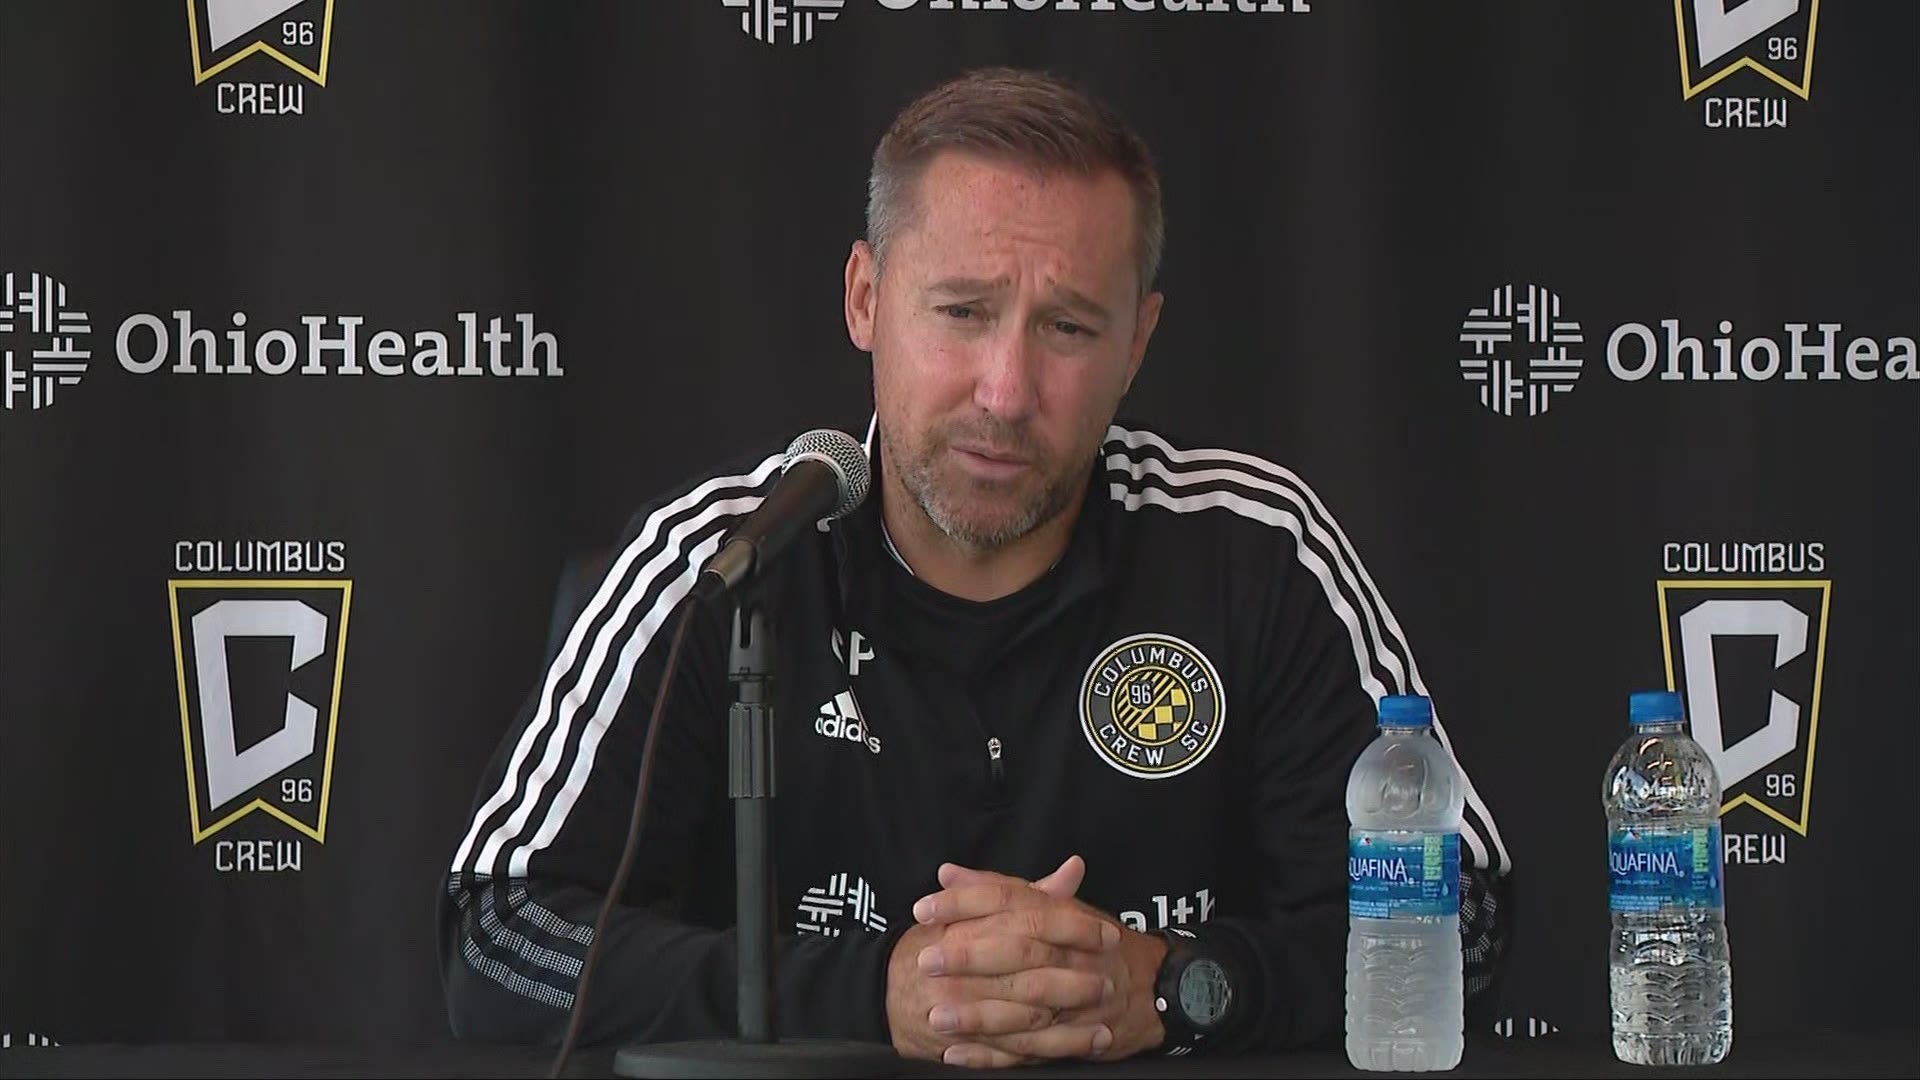 Columbus Crew's head coach Caleb Porter said his players have been able to win in big games which was a factor in the team's MLS Championship run.